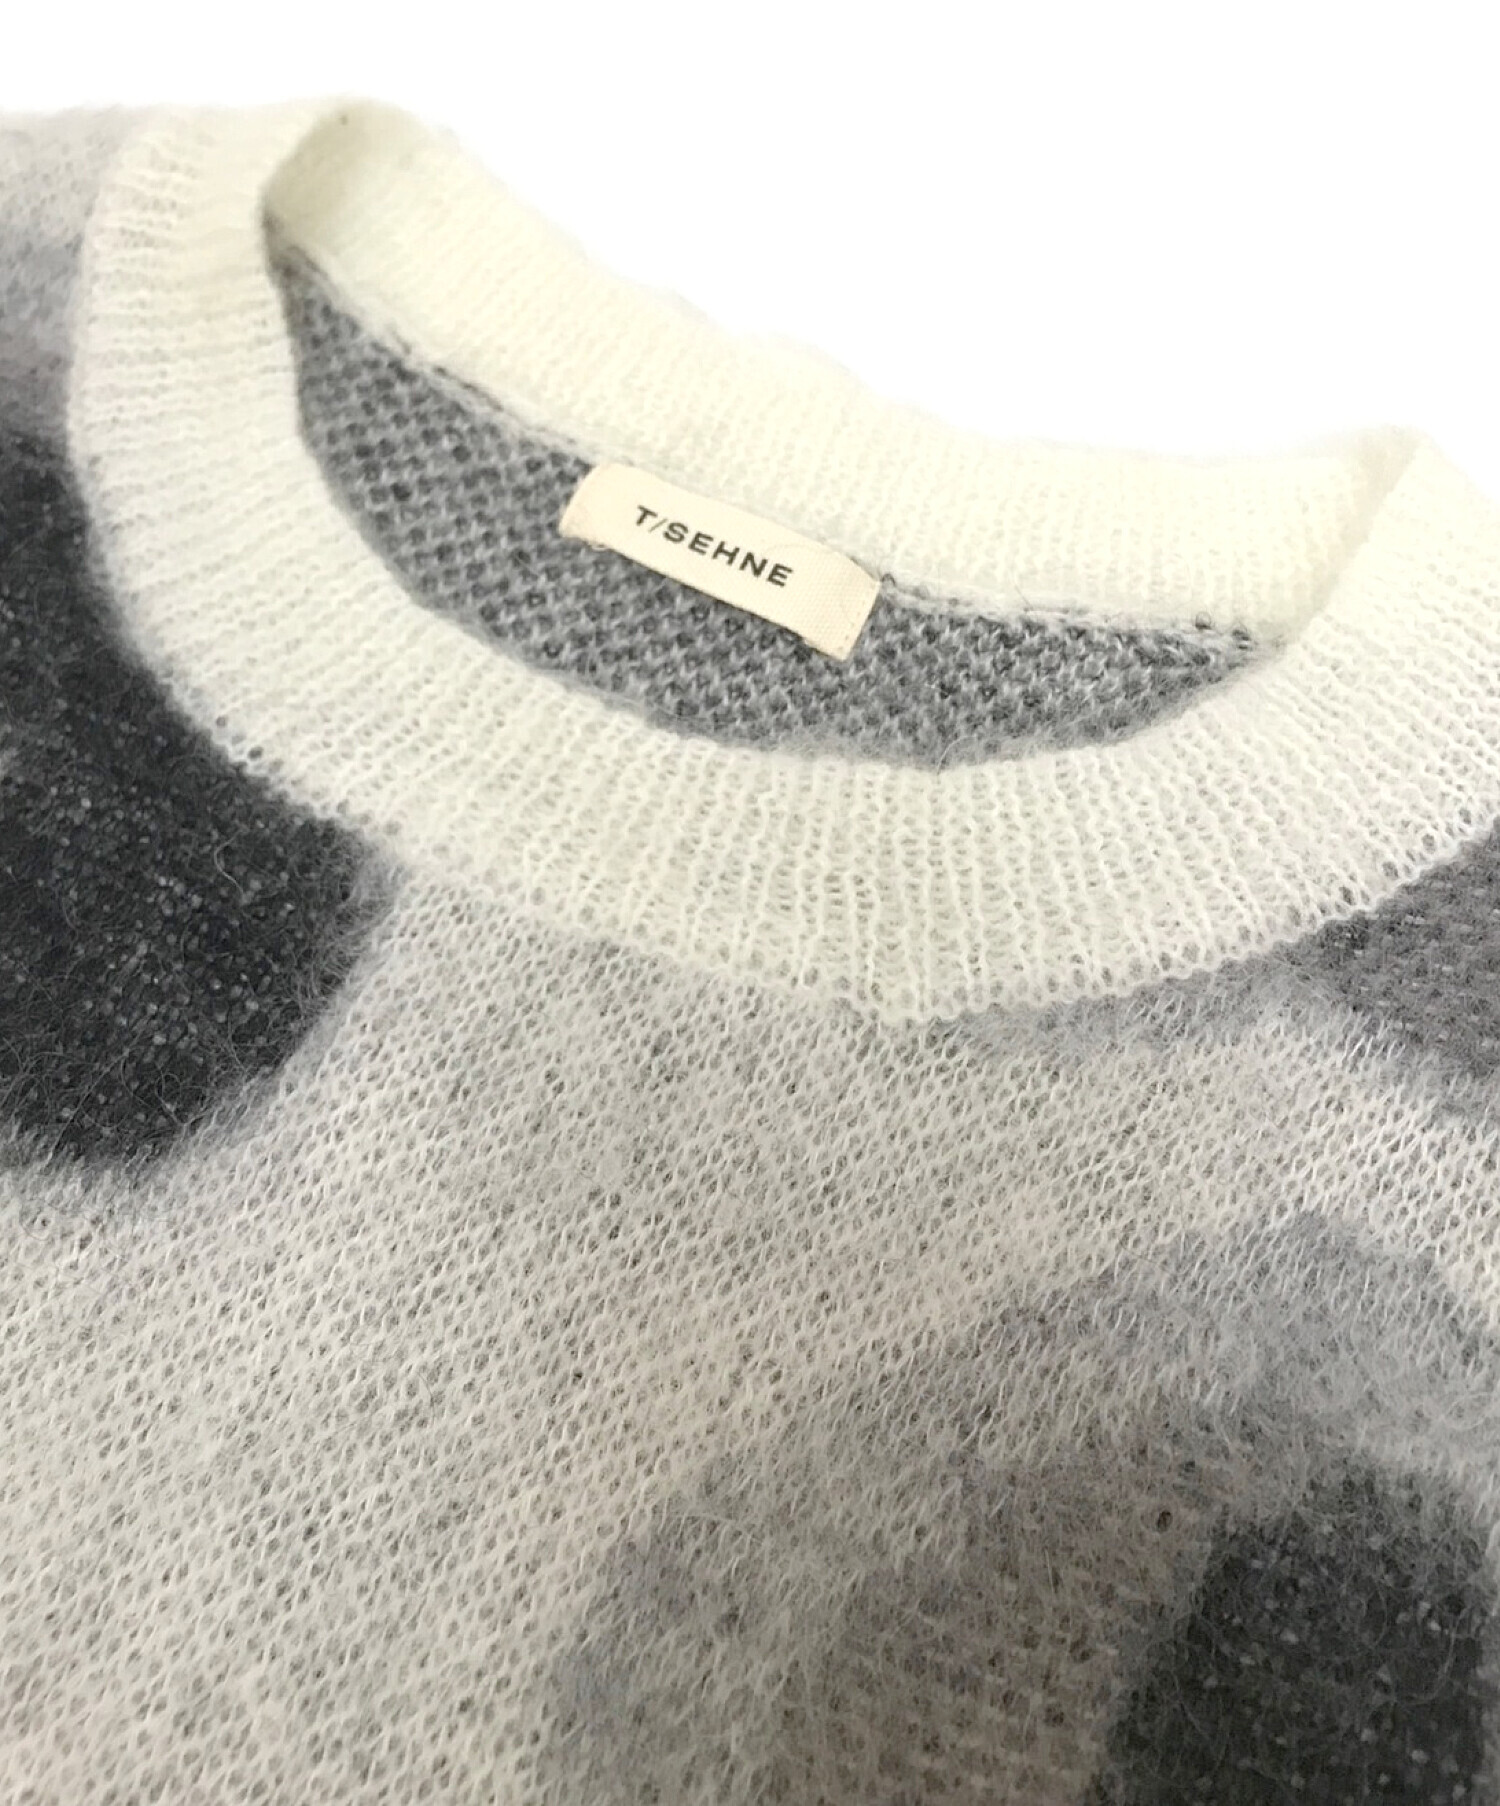 T/SEHNE SSENSE Exclusive Gray Sweater